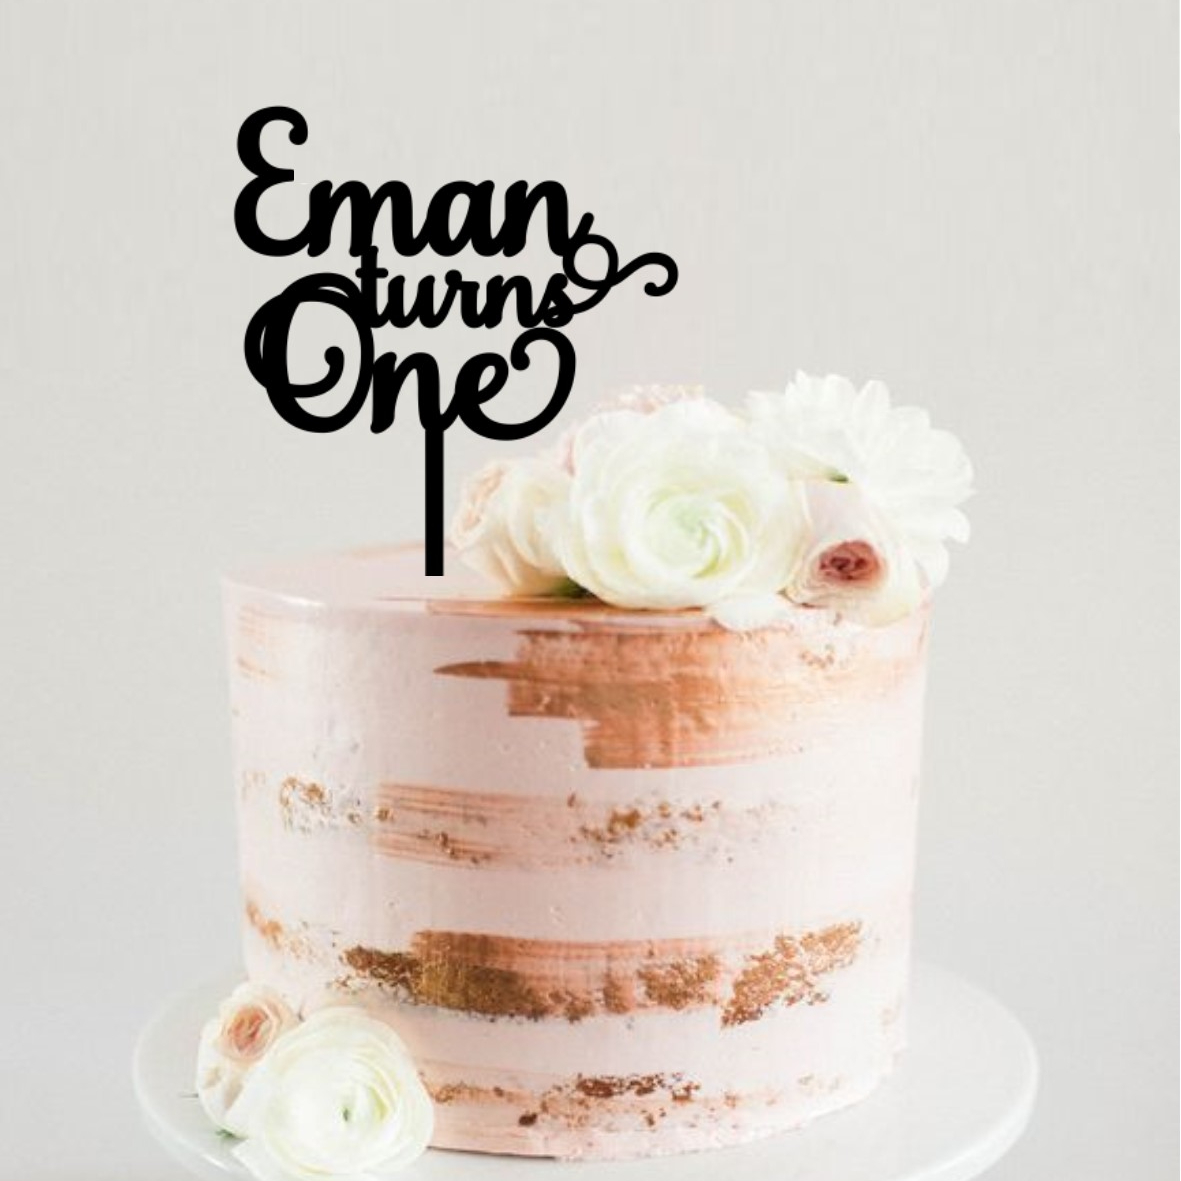 Quick Creations Cake Topper - Eman turns One